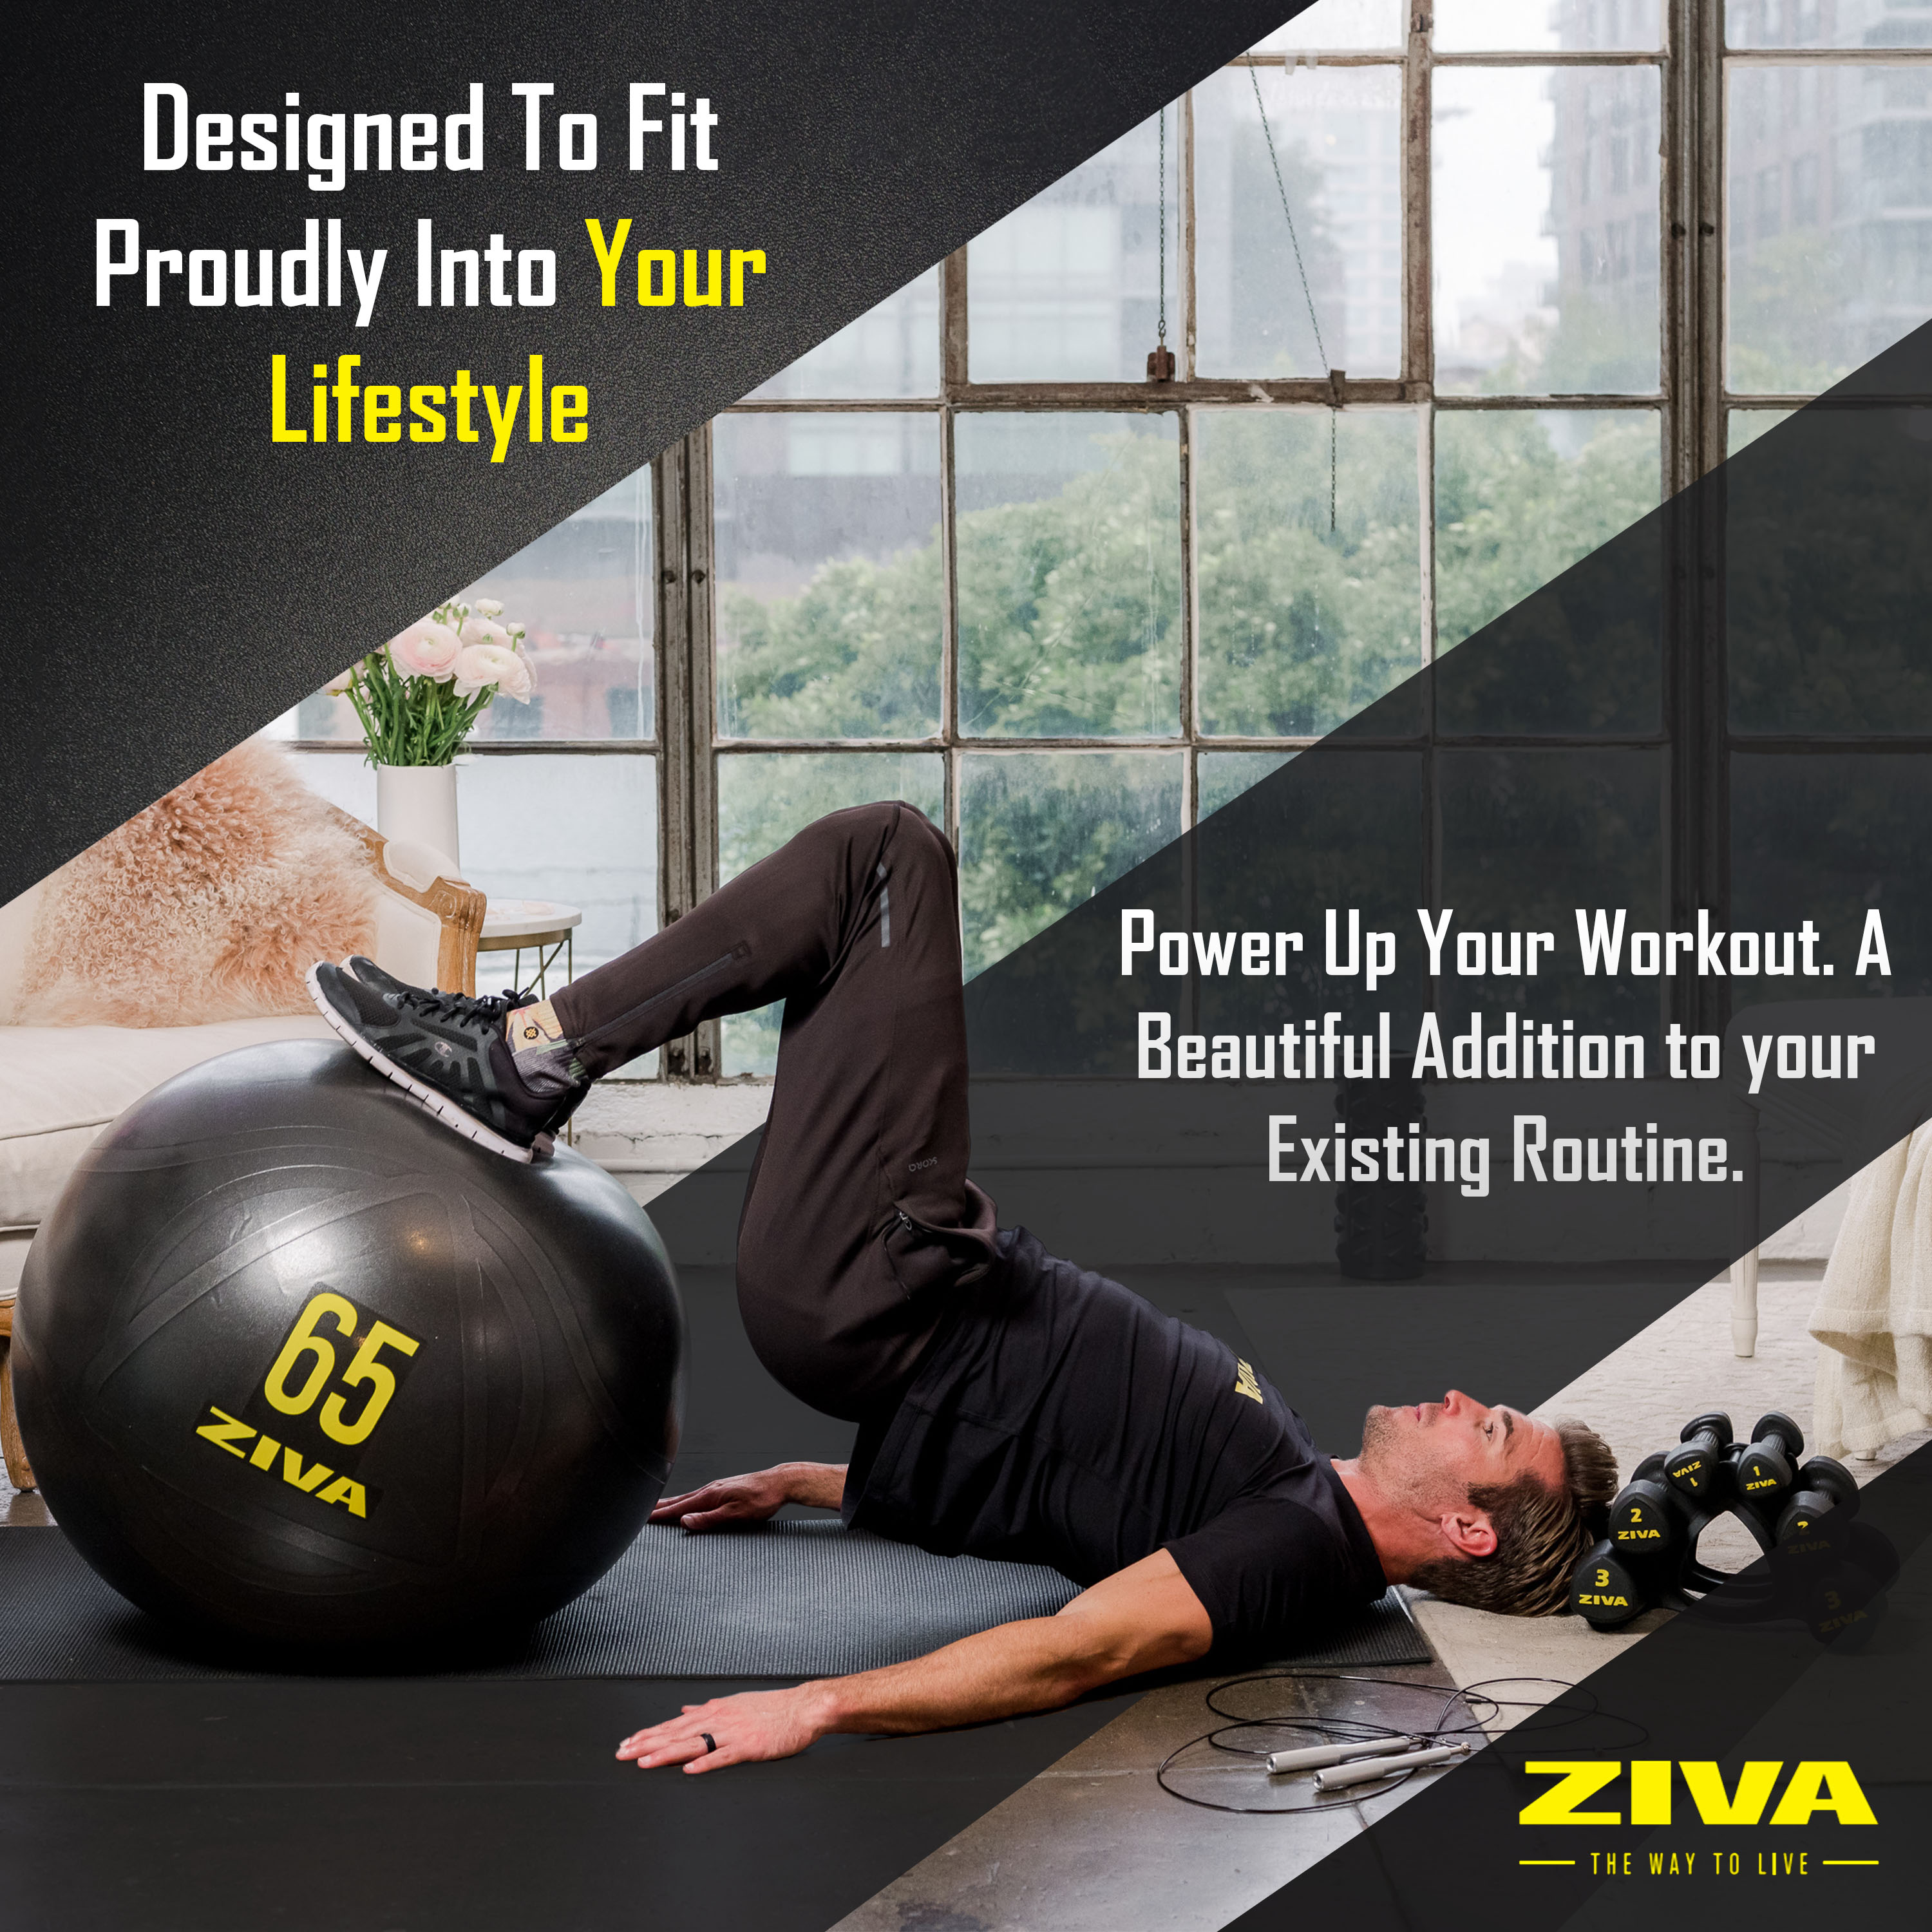 Designed to fit proudly into your lifestyle. Power up your workout. A beautiful addition to your existing routine.